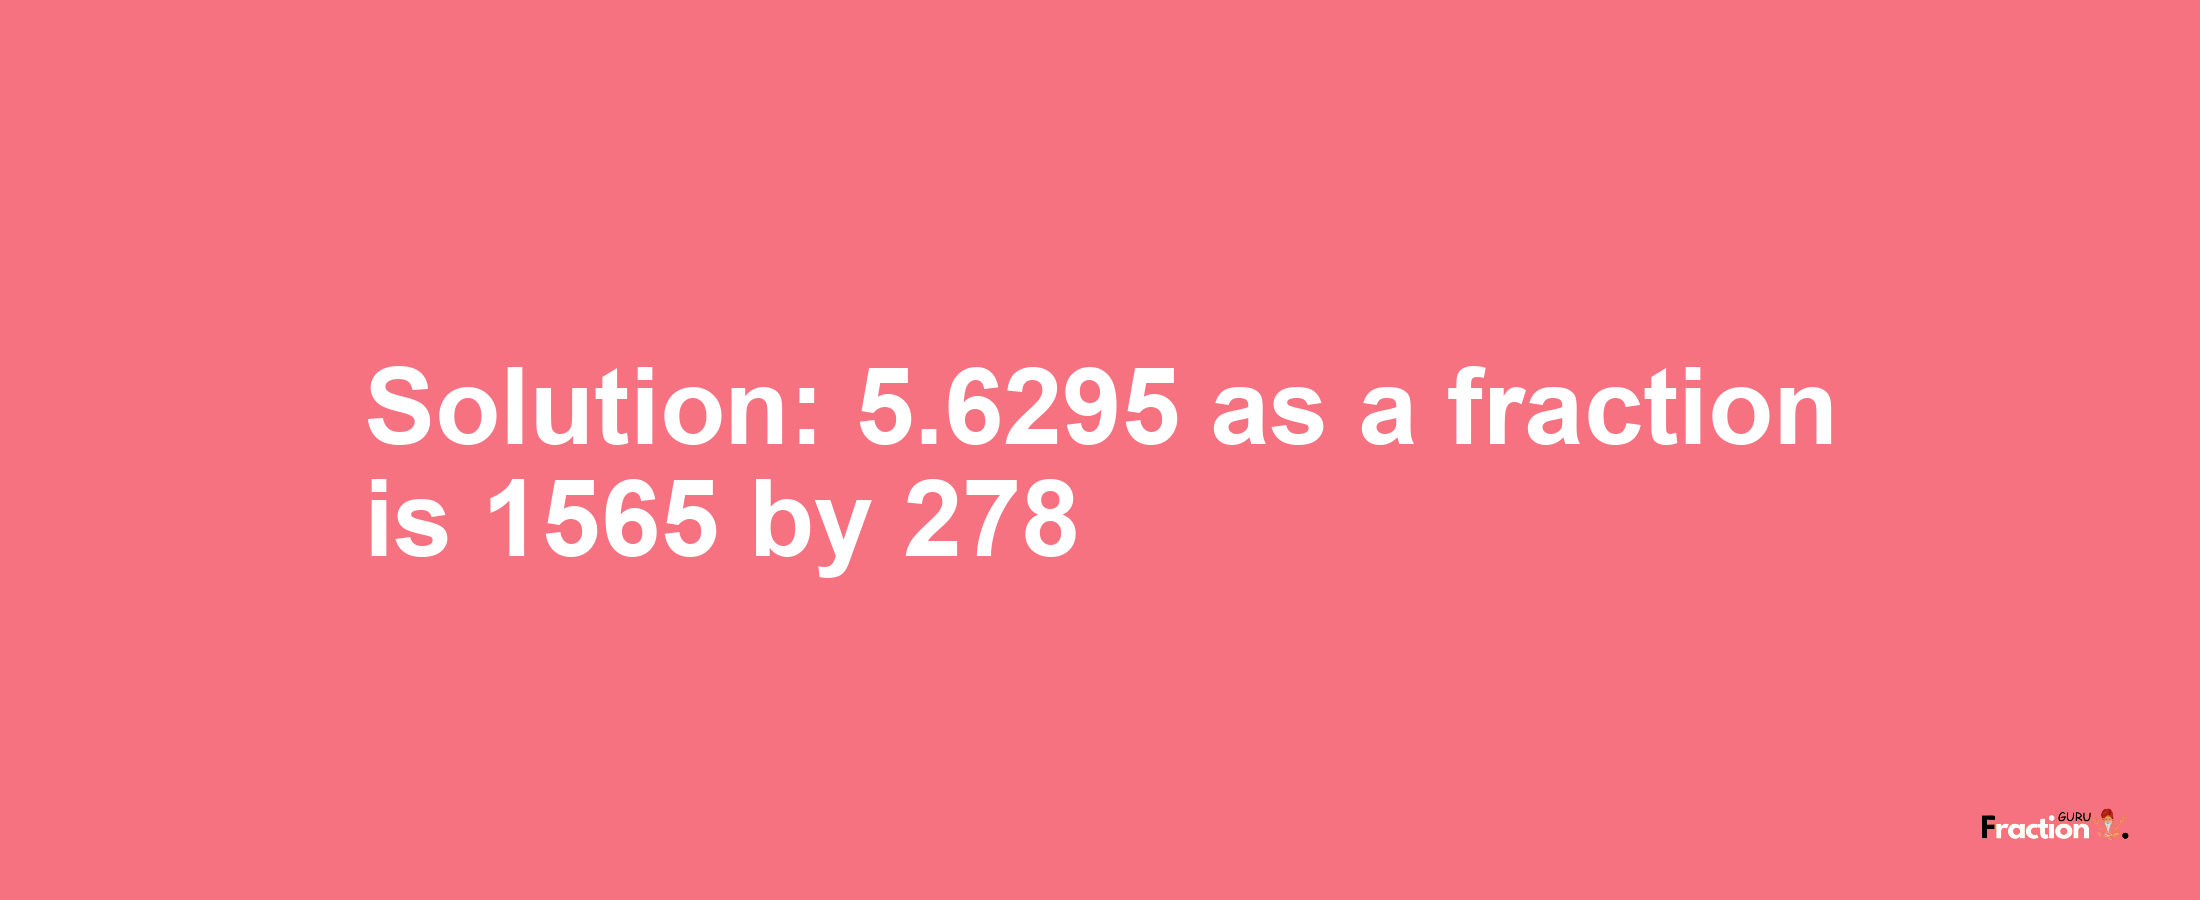 Solution:5.6295 as a fraction is 1565/278